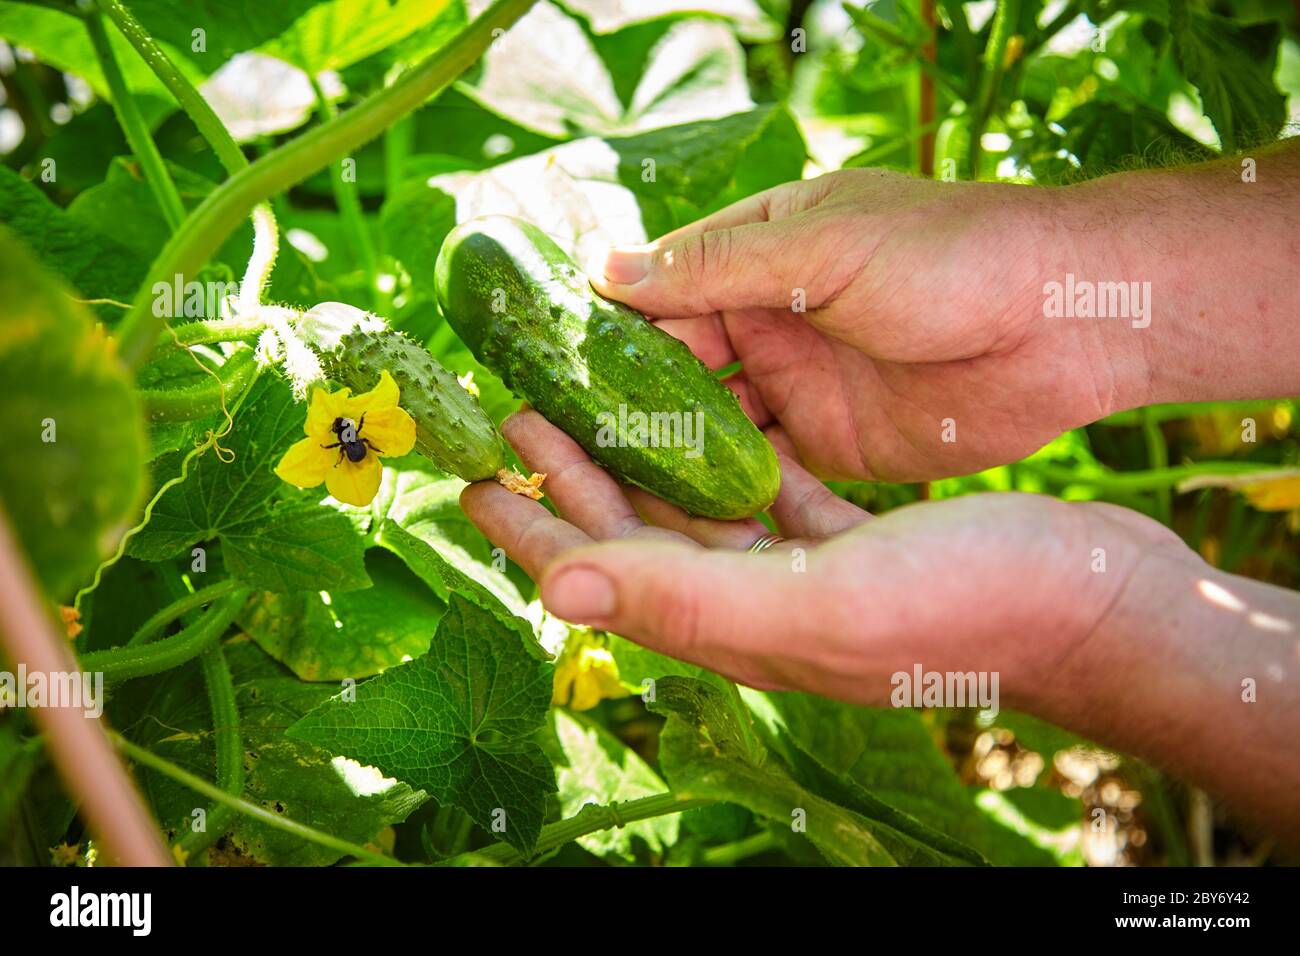 White Male Adult Hands Picking a Single Fresh Cucumber from the Vine with Bee in Flower Stock Photo